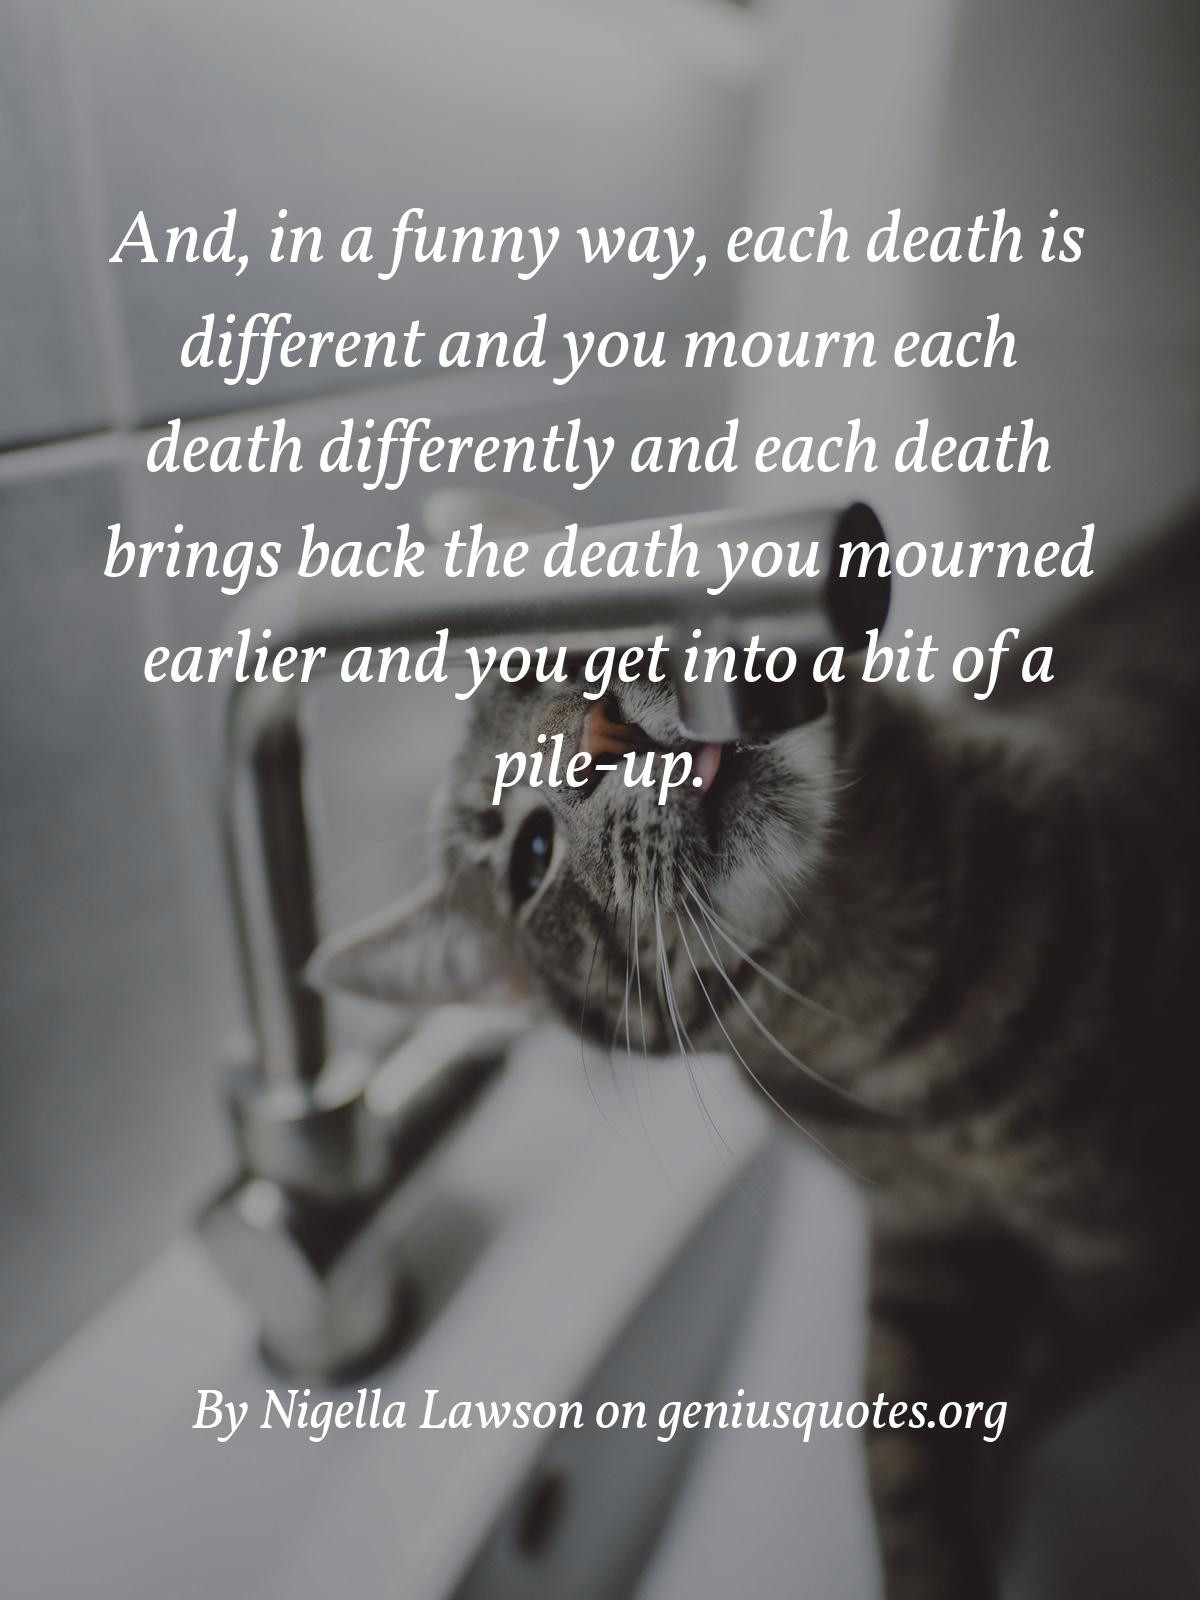 Funny Quotes About Death Luxury Quote And In A Funny Way Each Is Different And Of Funny Quotes About Death 